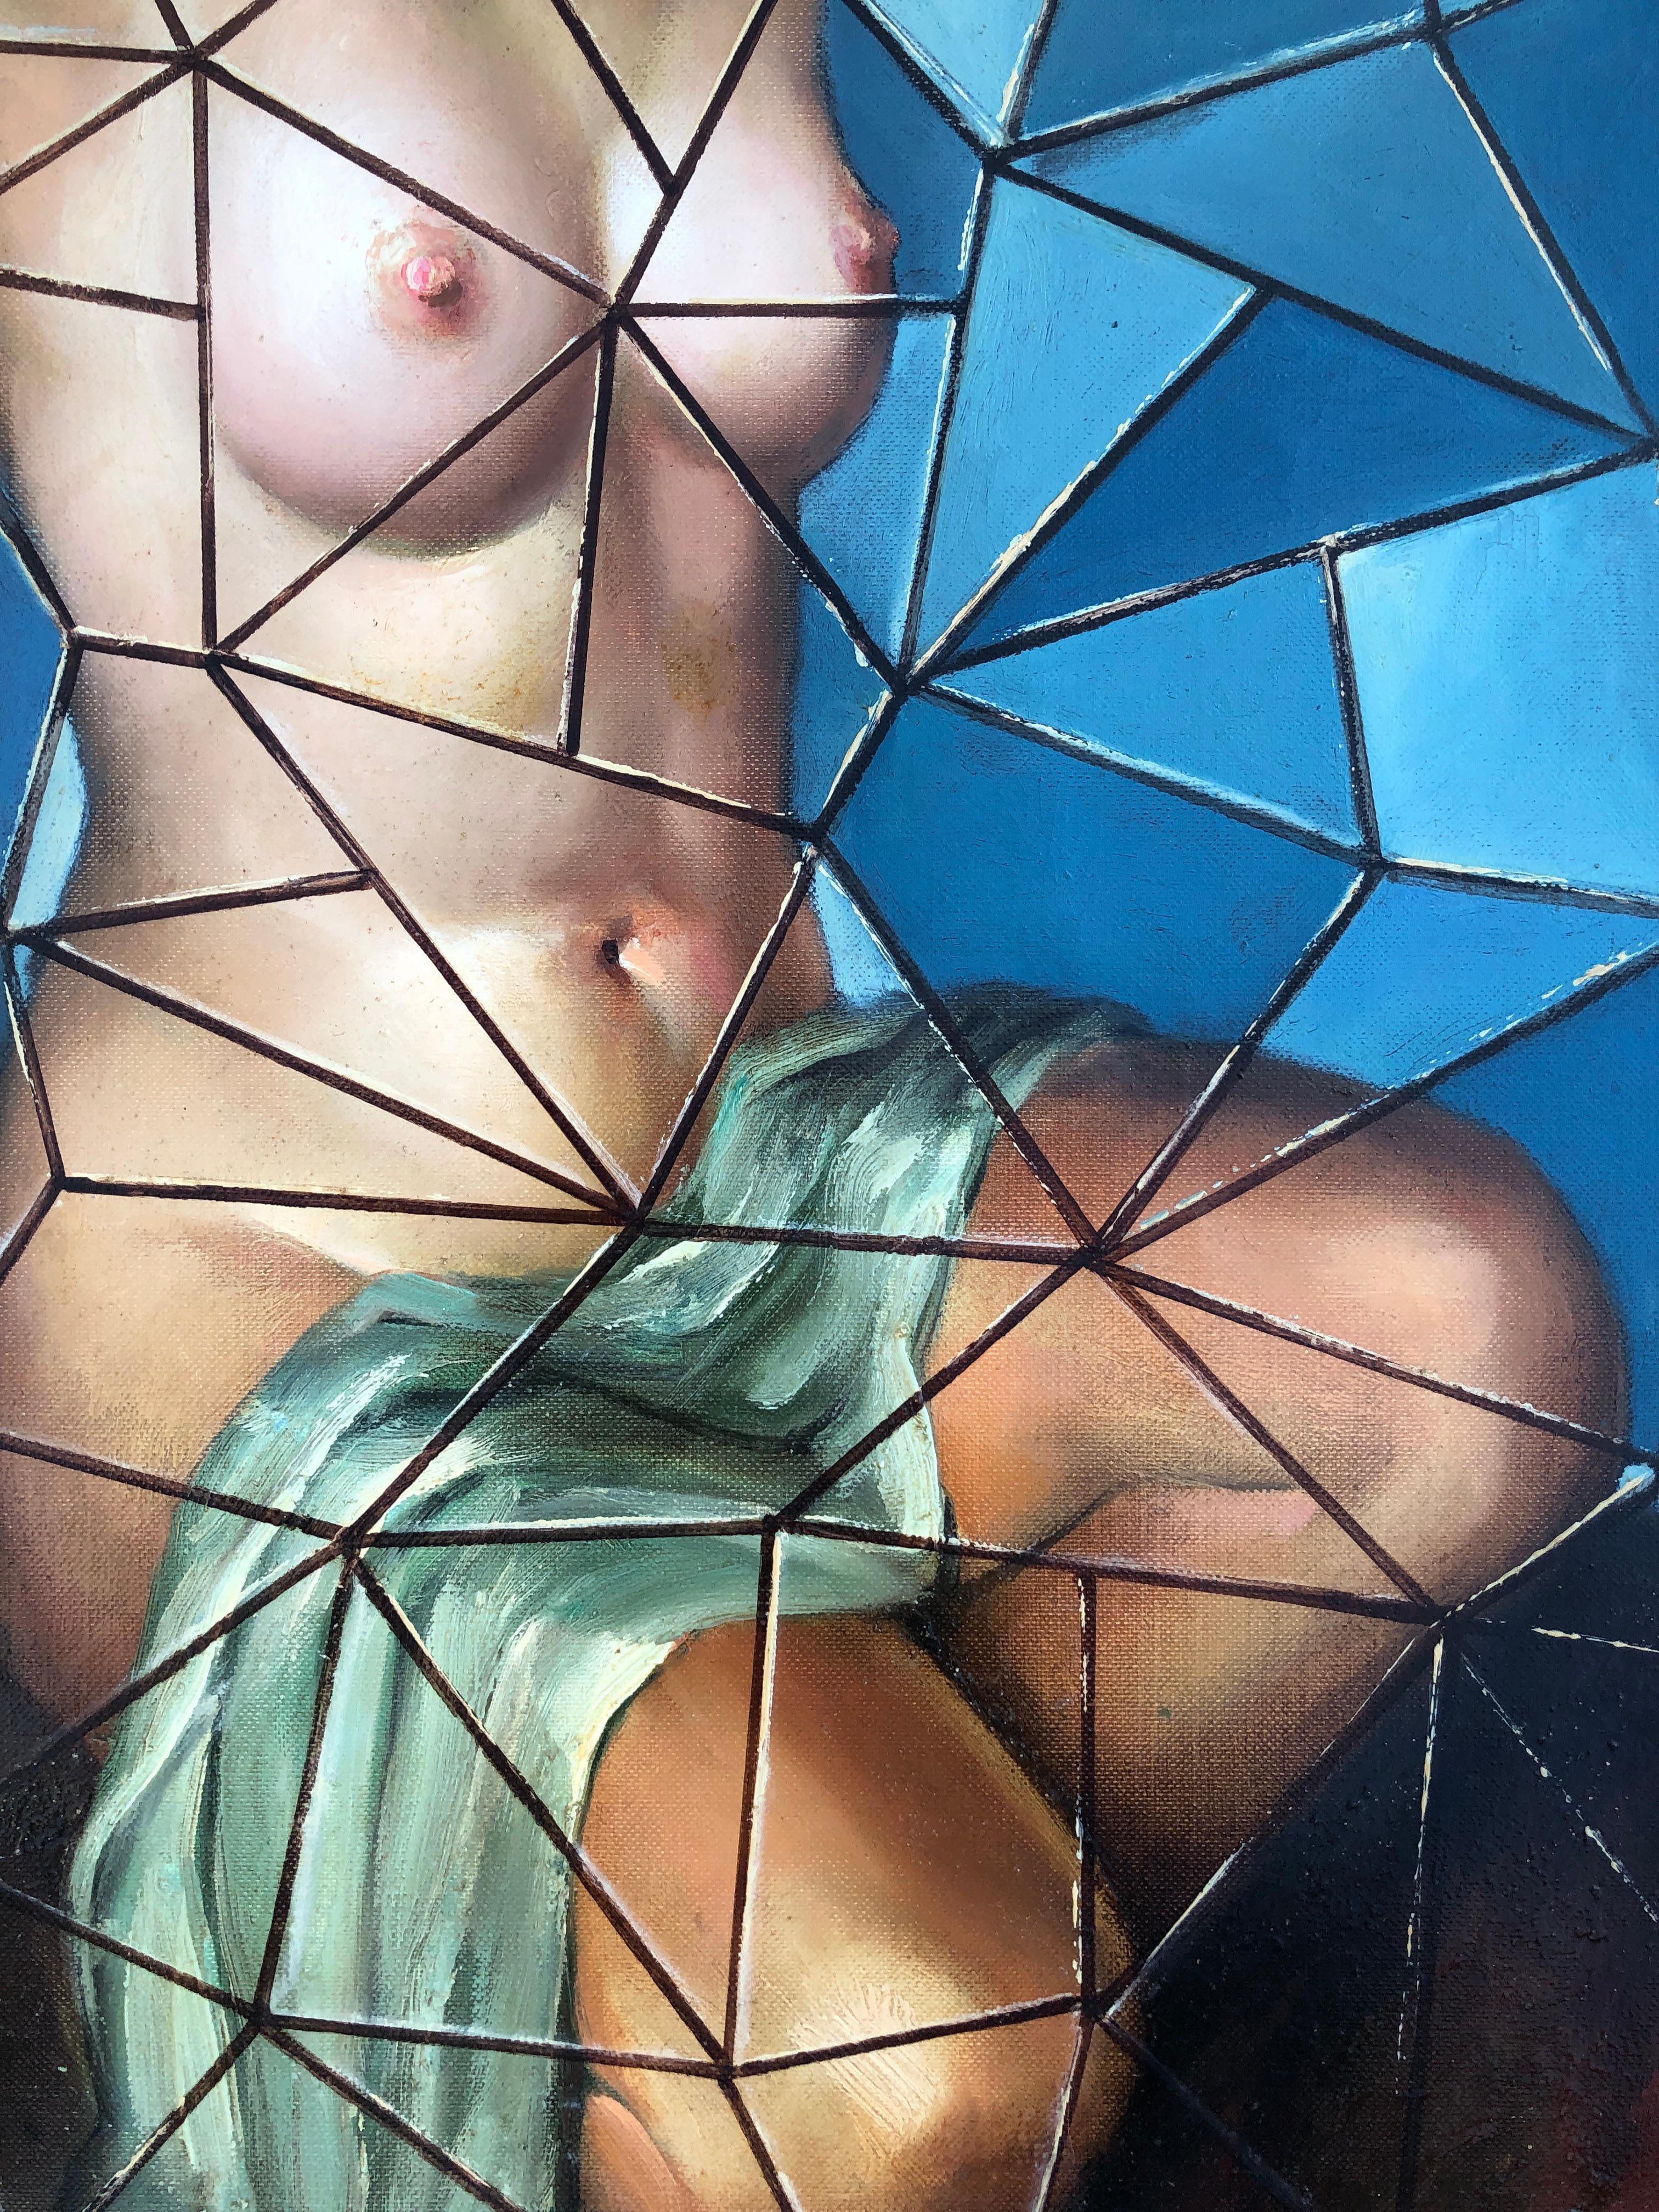 Stained glass window with naked woman oil on canvas painting - Blue Nude Painting by Quimet Sabate